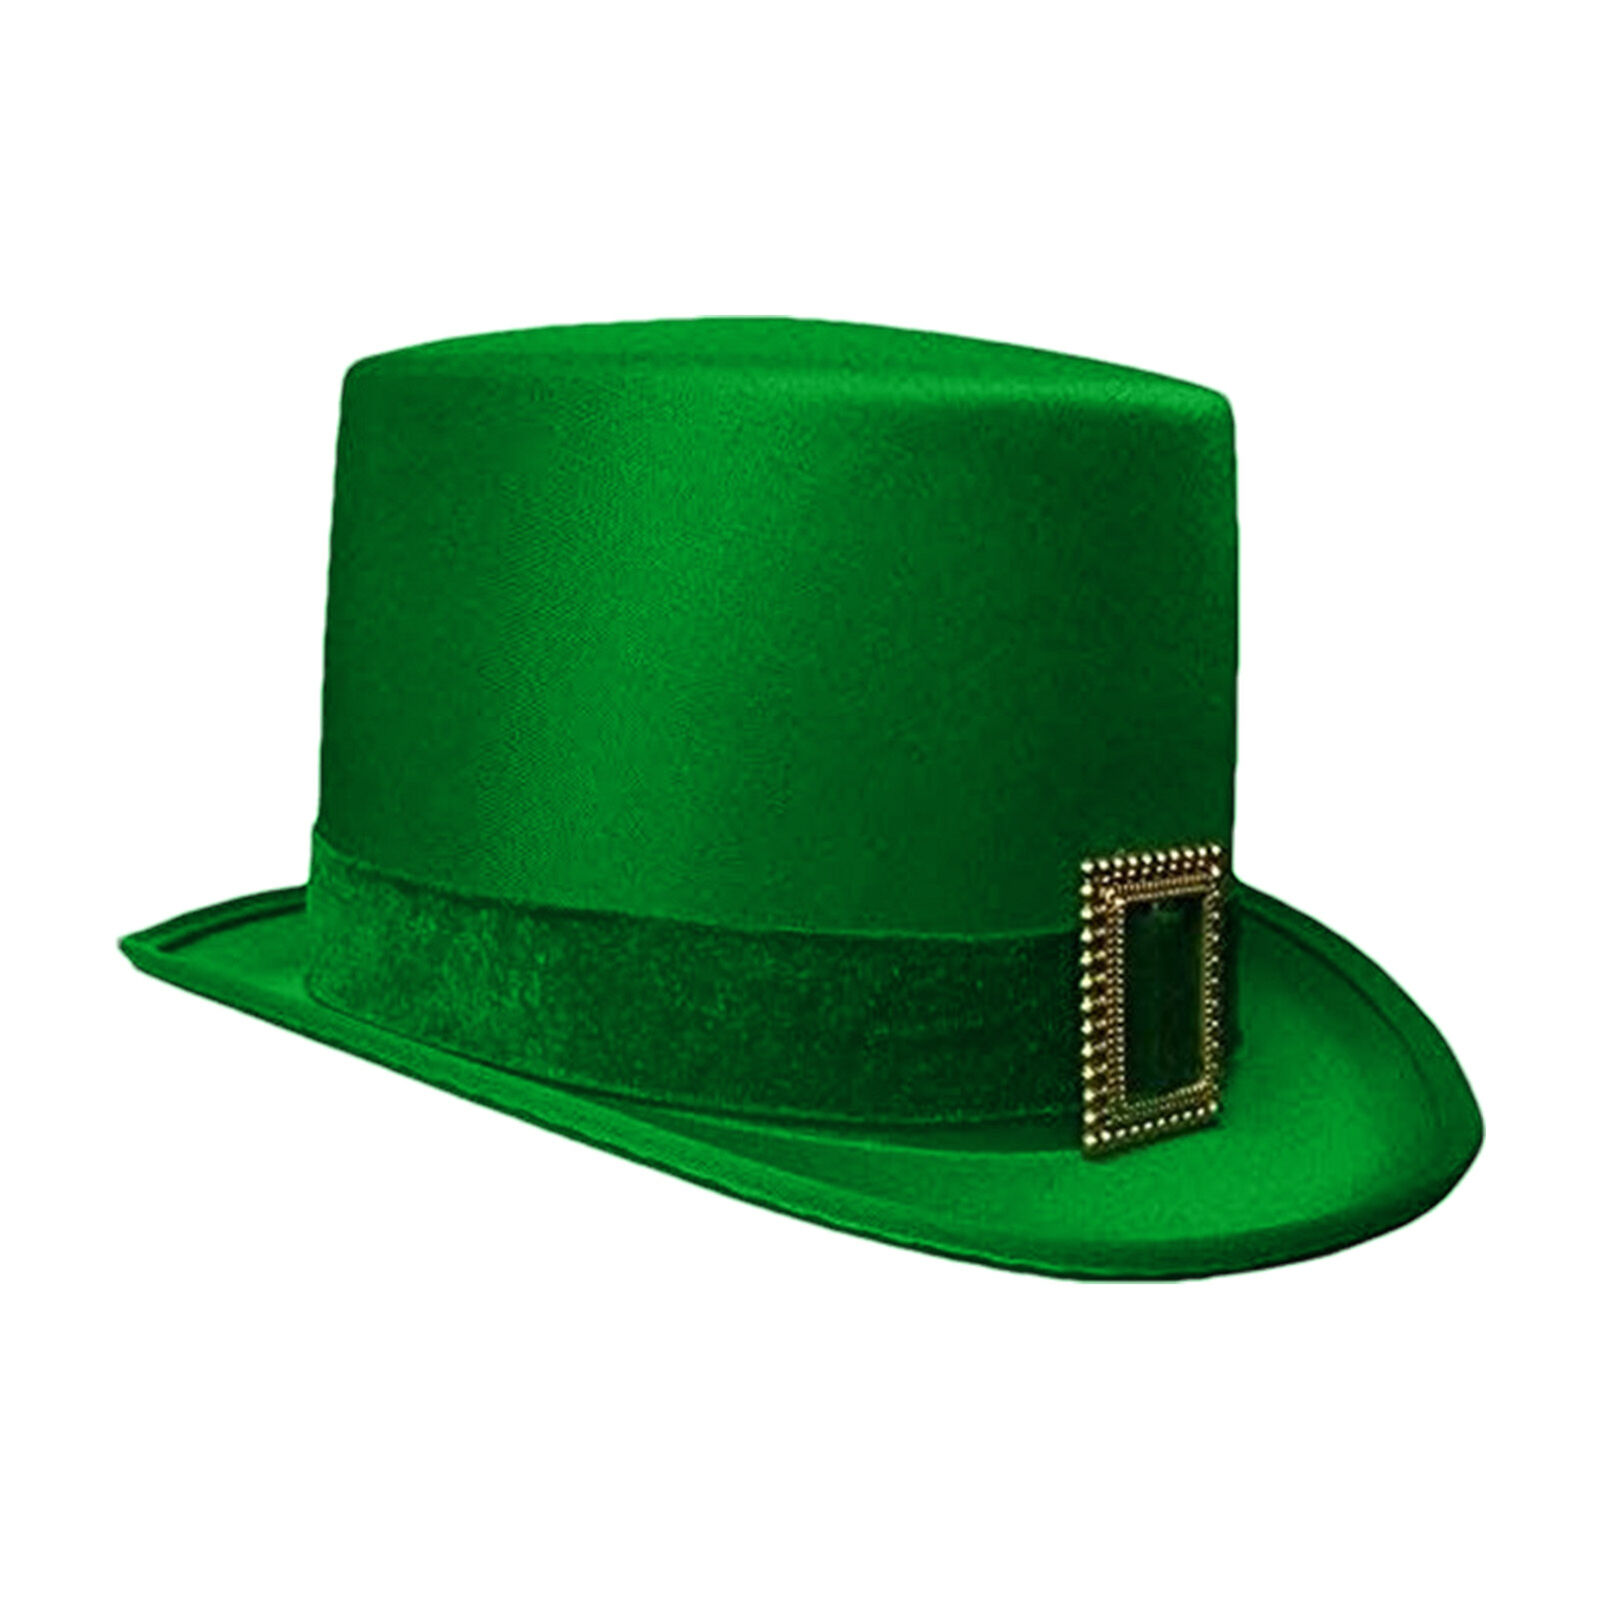 St. Patrick's Day Top Hat Fashion Shamrock Hats Costume Accessory For Women, Men